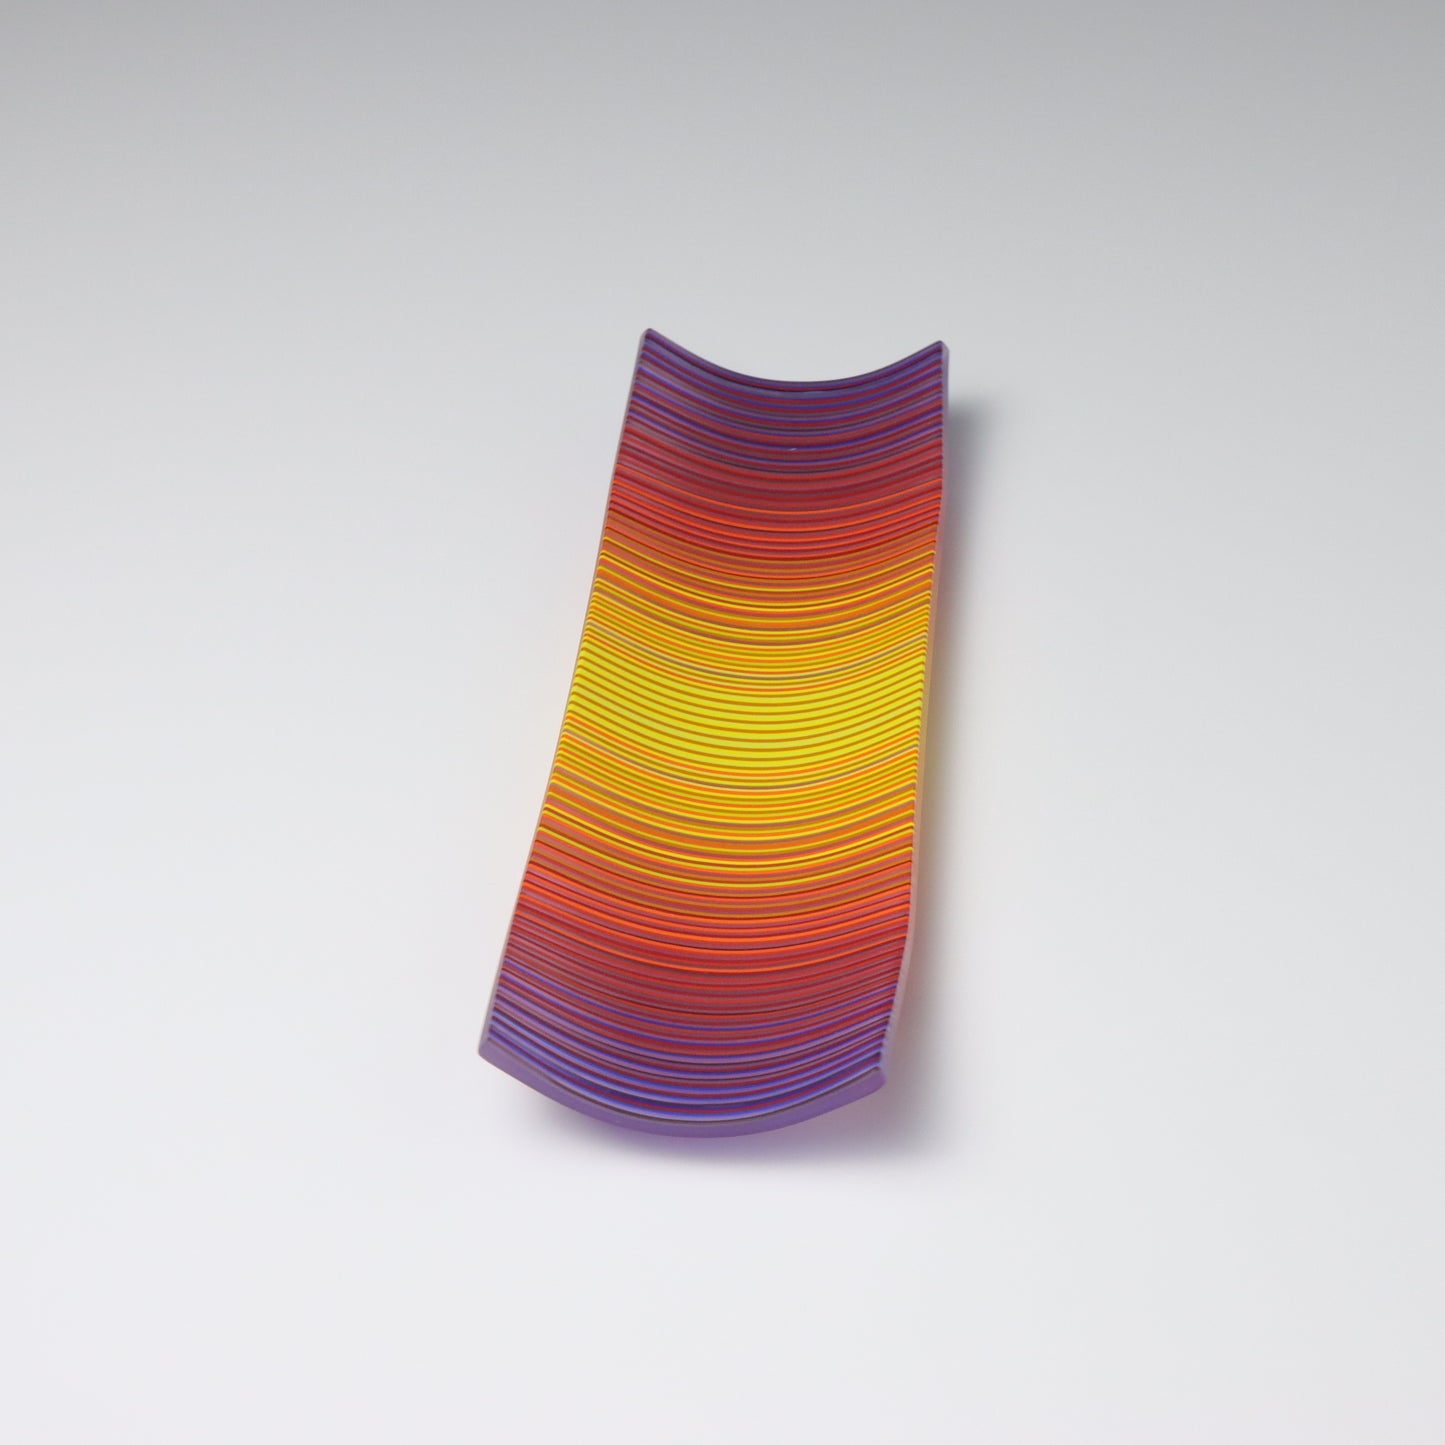 S3SSH1 | Rectangular Shaped ColourWave Glass Plate | Purple, Red and Yellow.